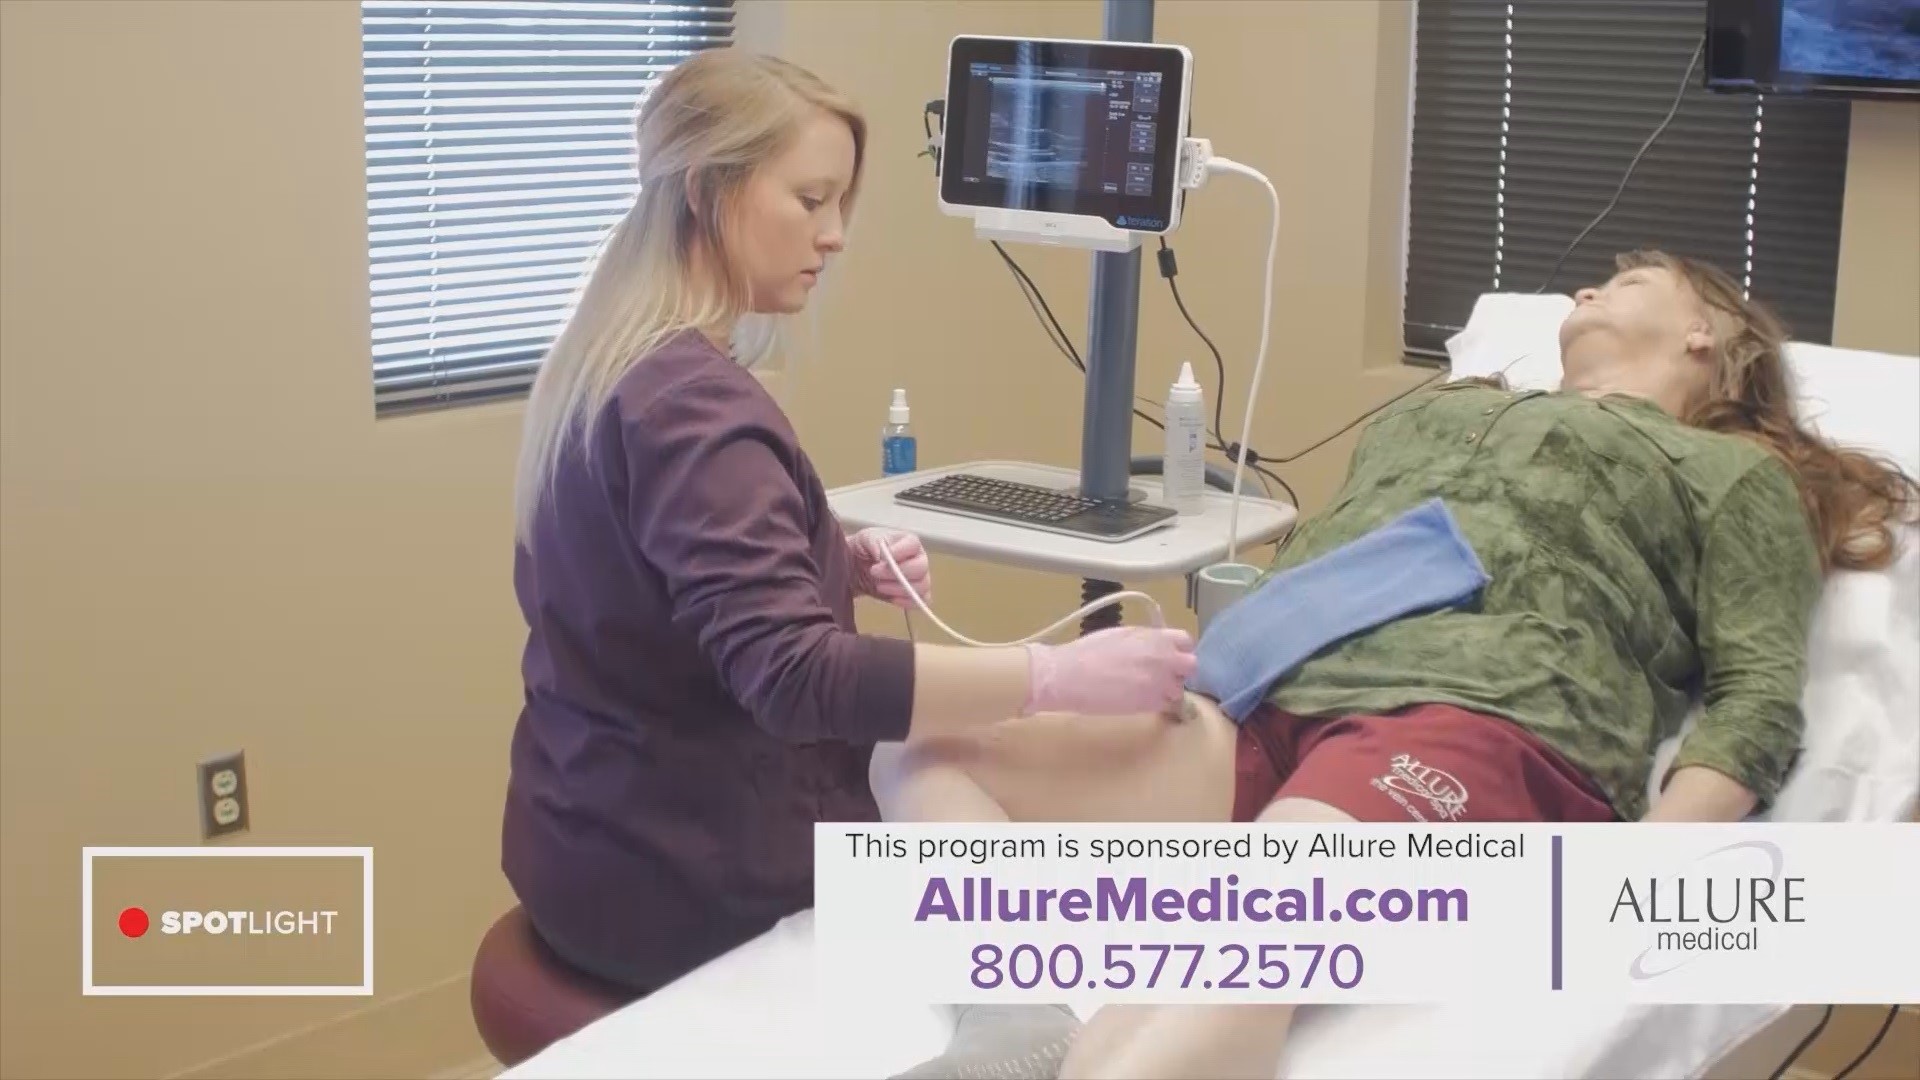 To schedule your free leg screening at Allure’s Columbia office, call 803-359-8346